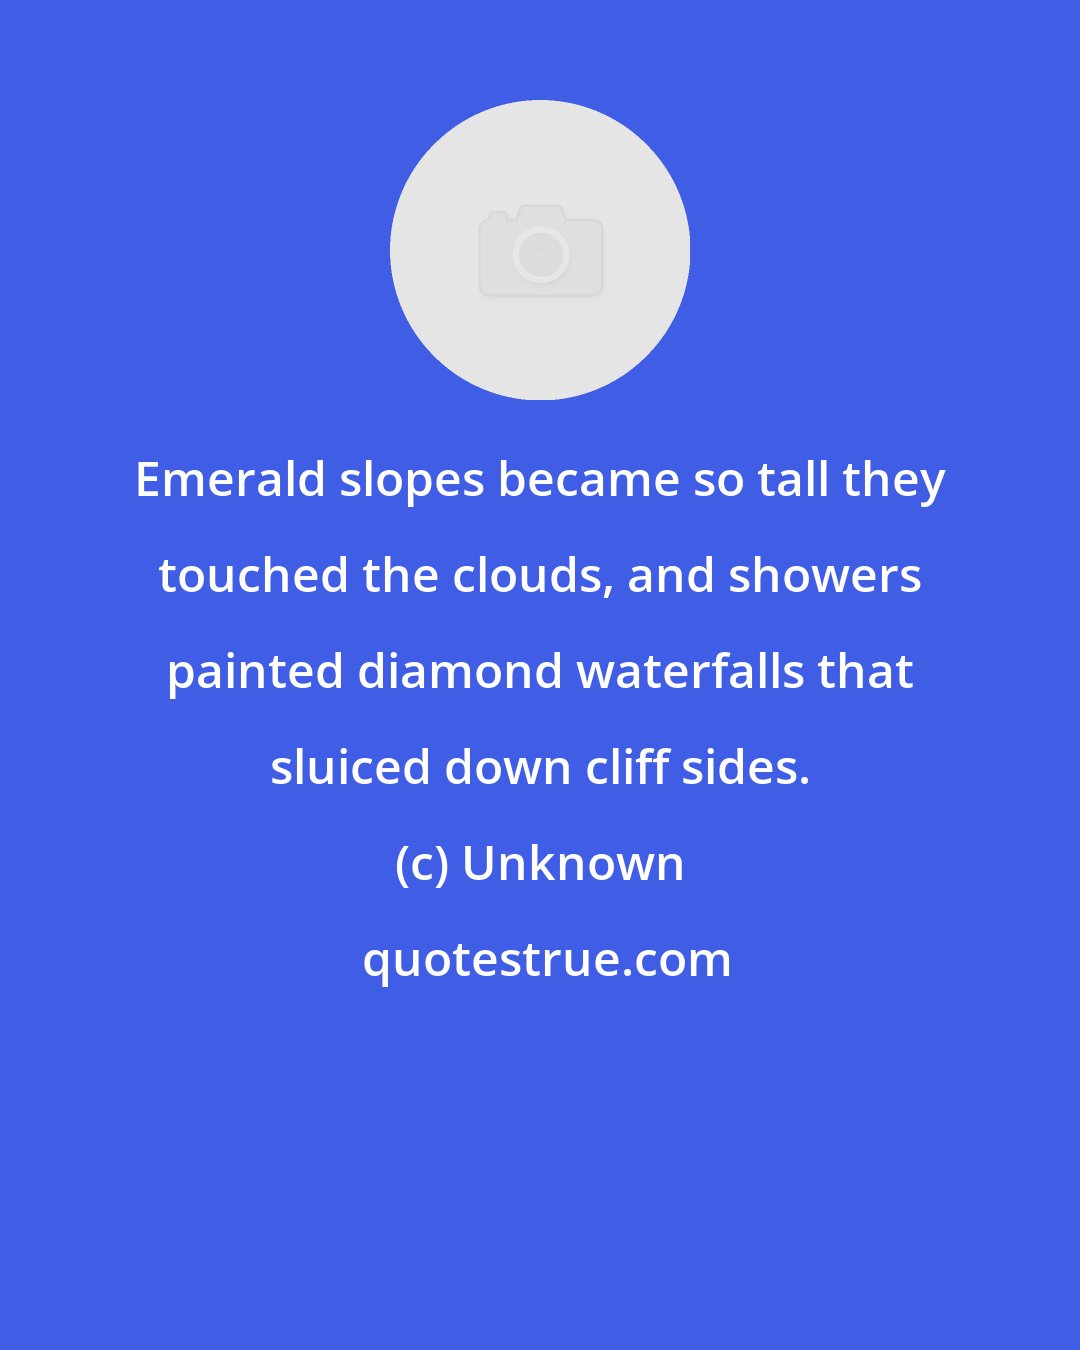 Unknown: Emerald slopes became so tall they touched the clouds, and showers painted diamond waterfalls that sluiced down cliff sides.